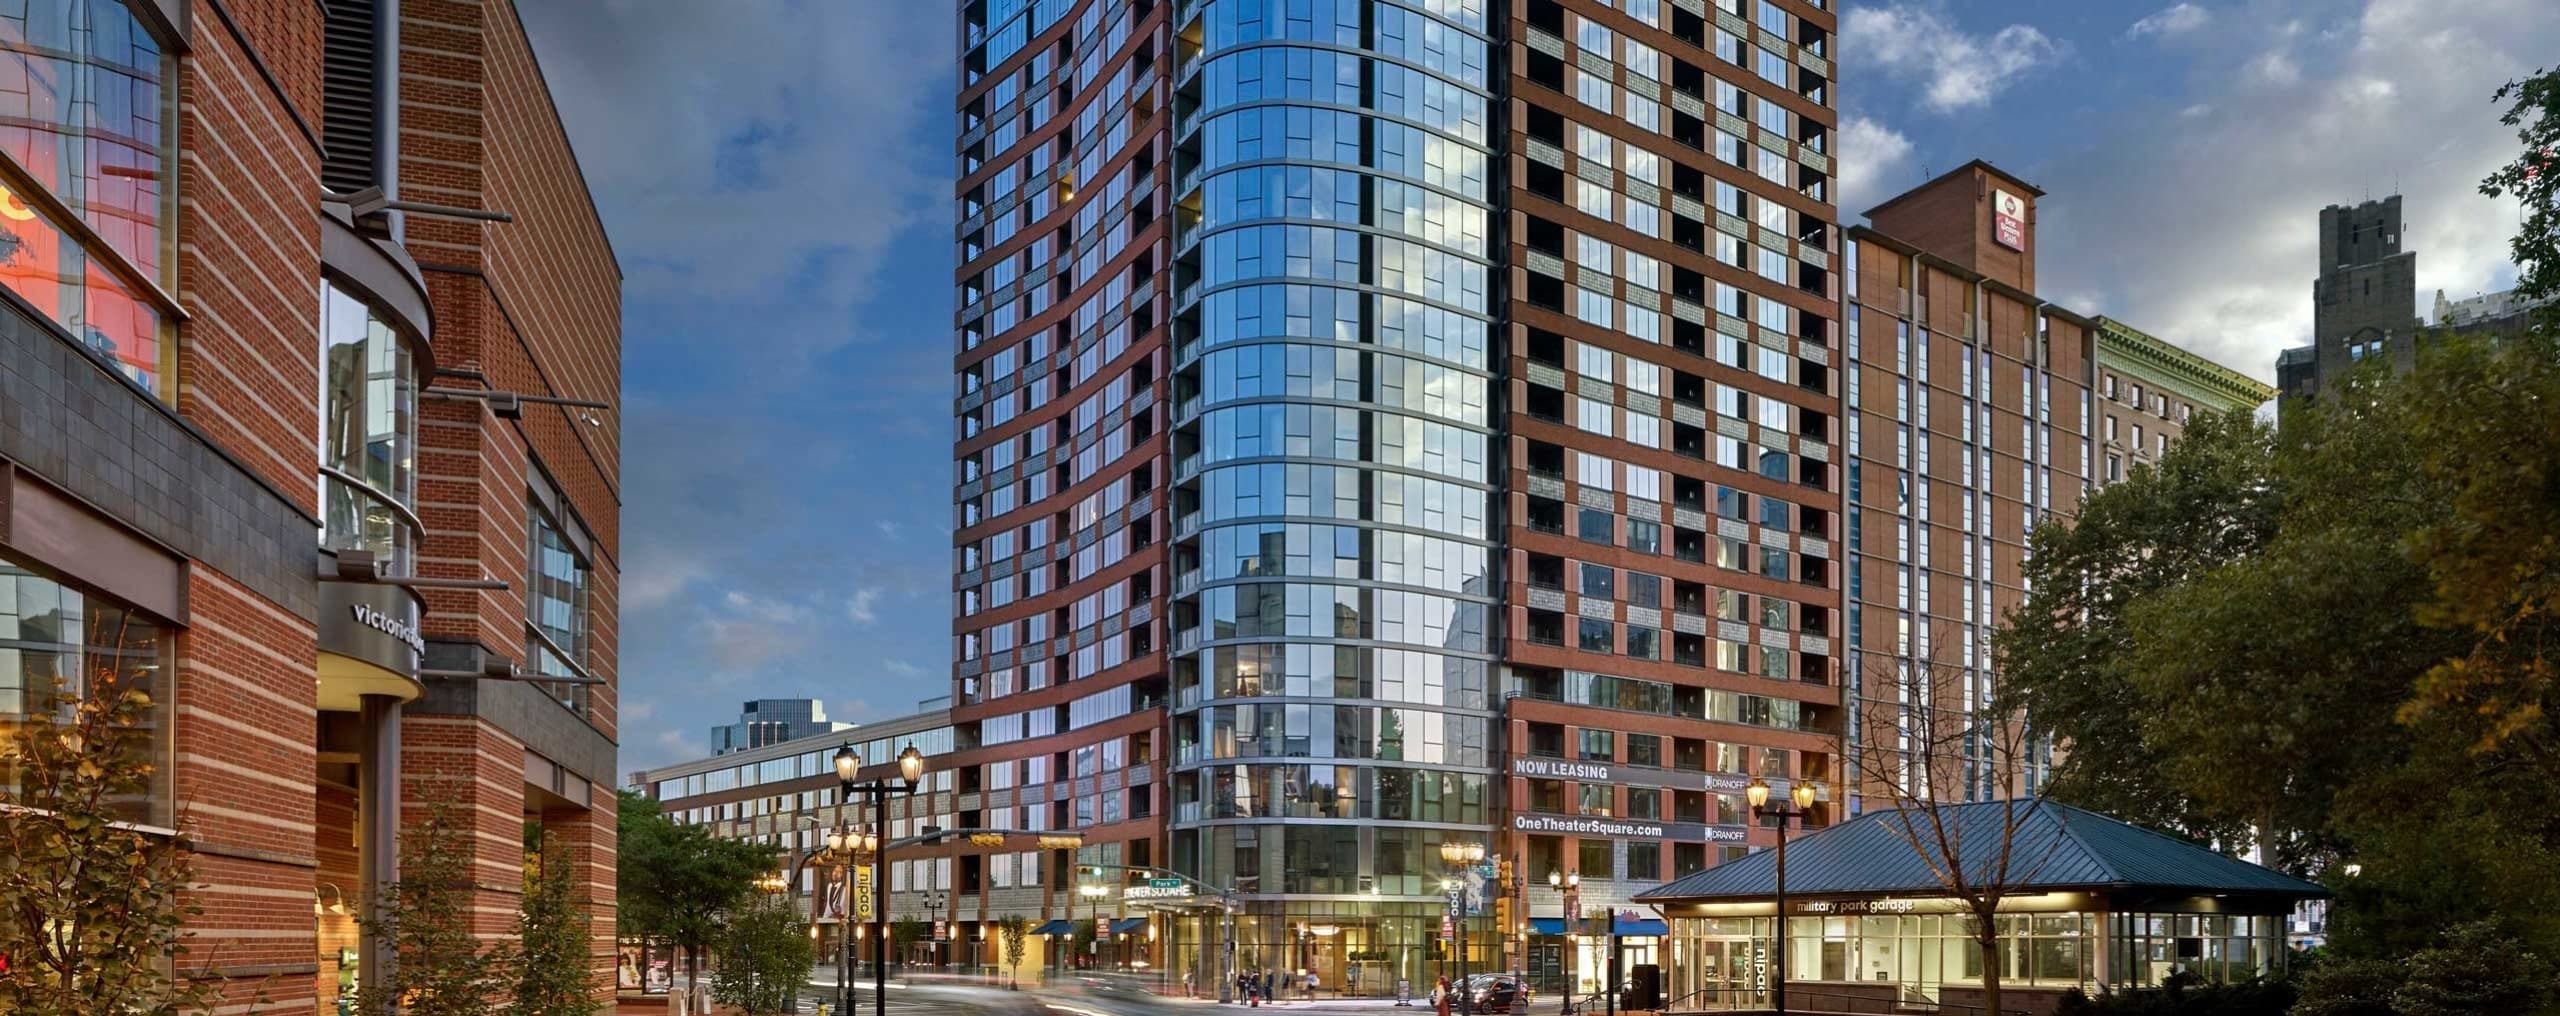 New luxury 'Lofts' moving into Prudential Center in Newark NJ